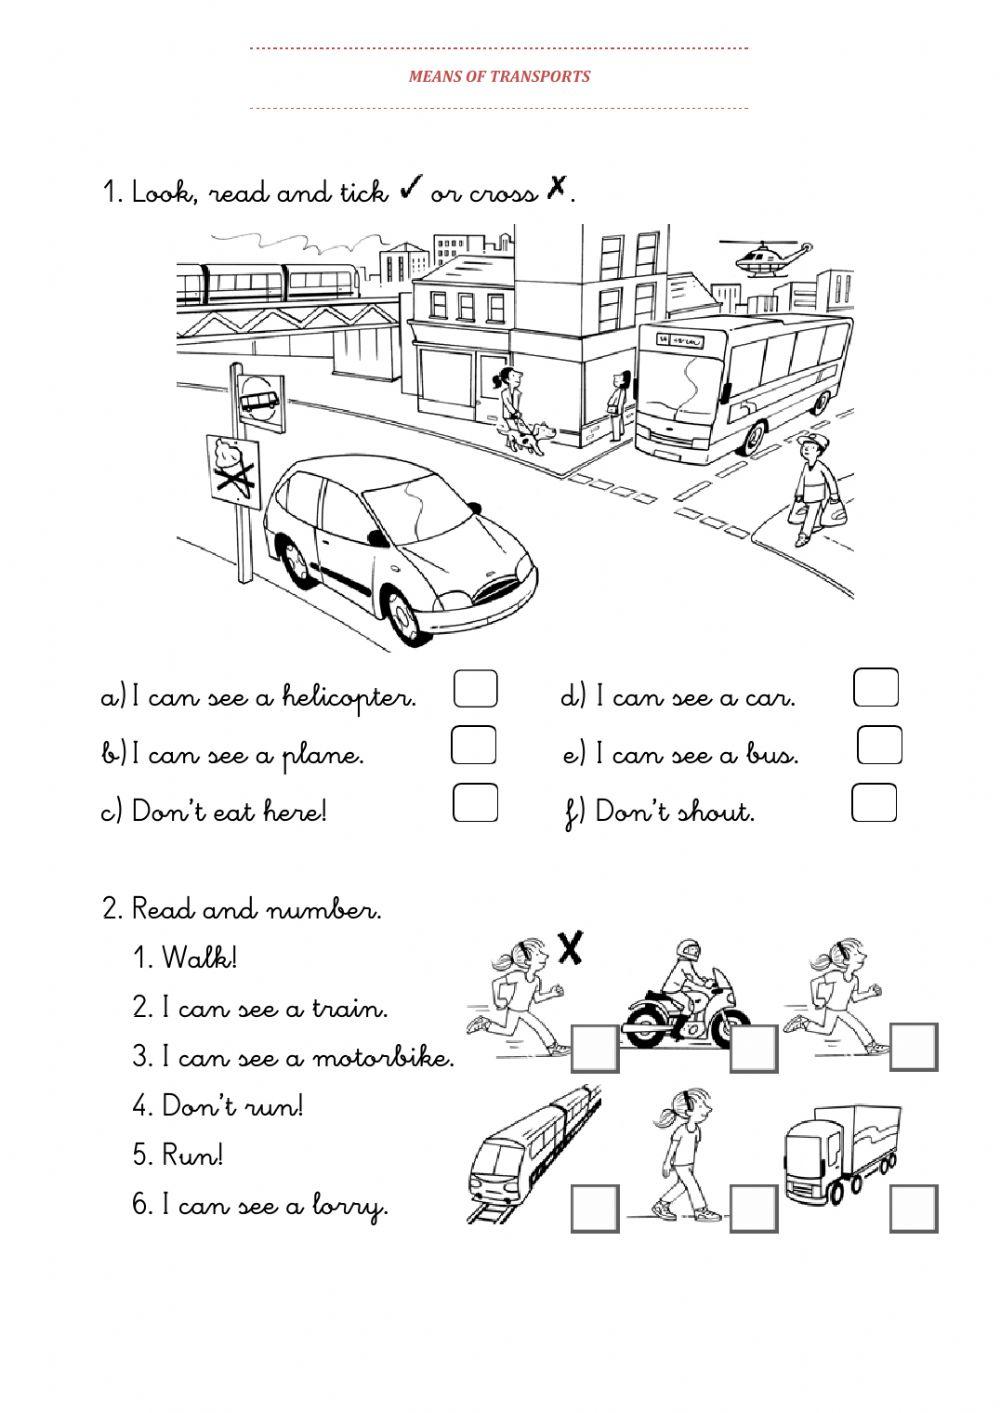 Means of transport online exercise for A1